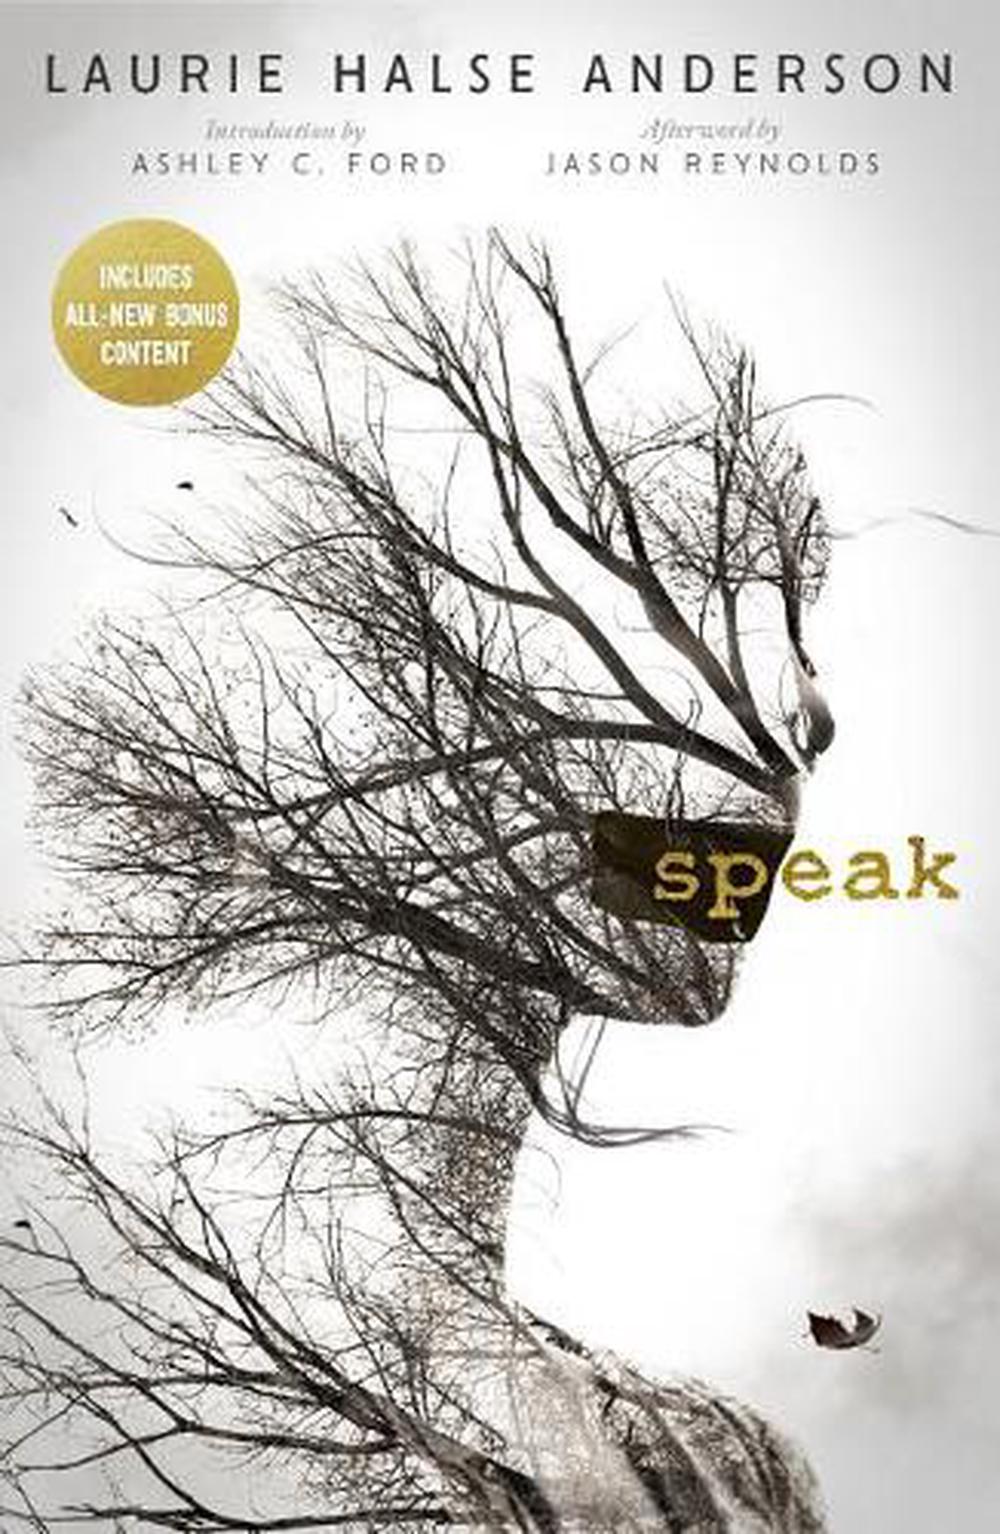 book review for speak